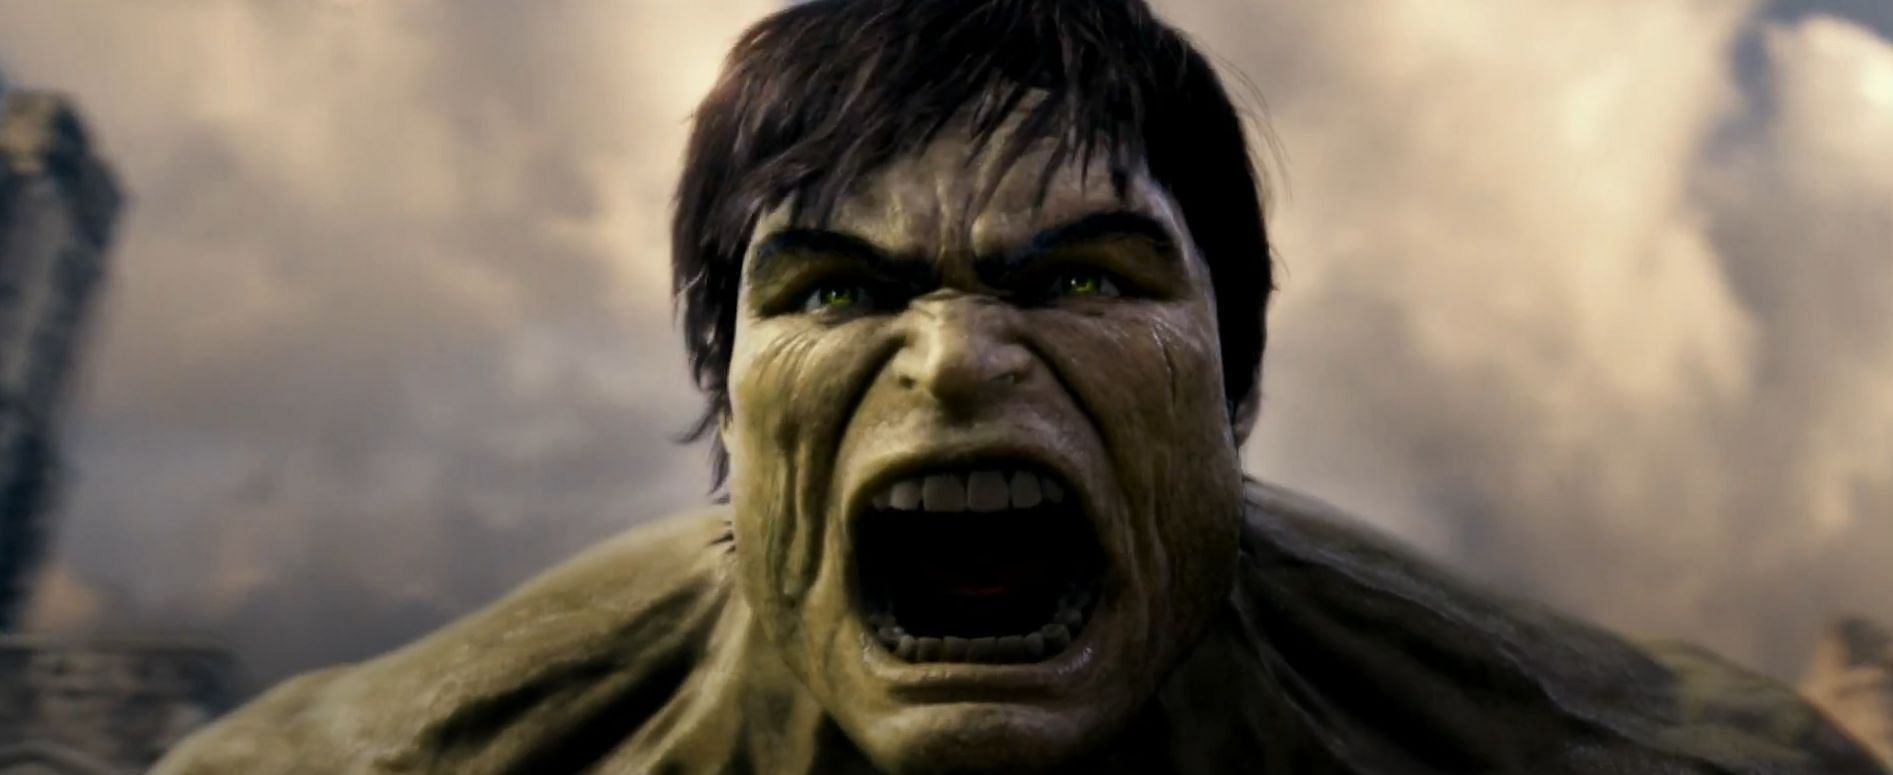 A still from The Incredible Hulk (Image via Marvel)